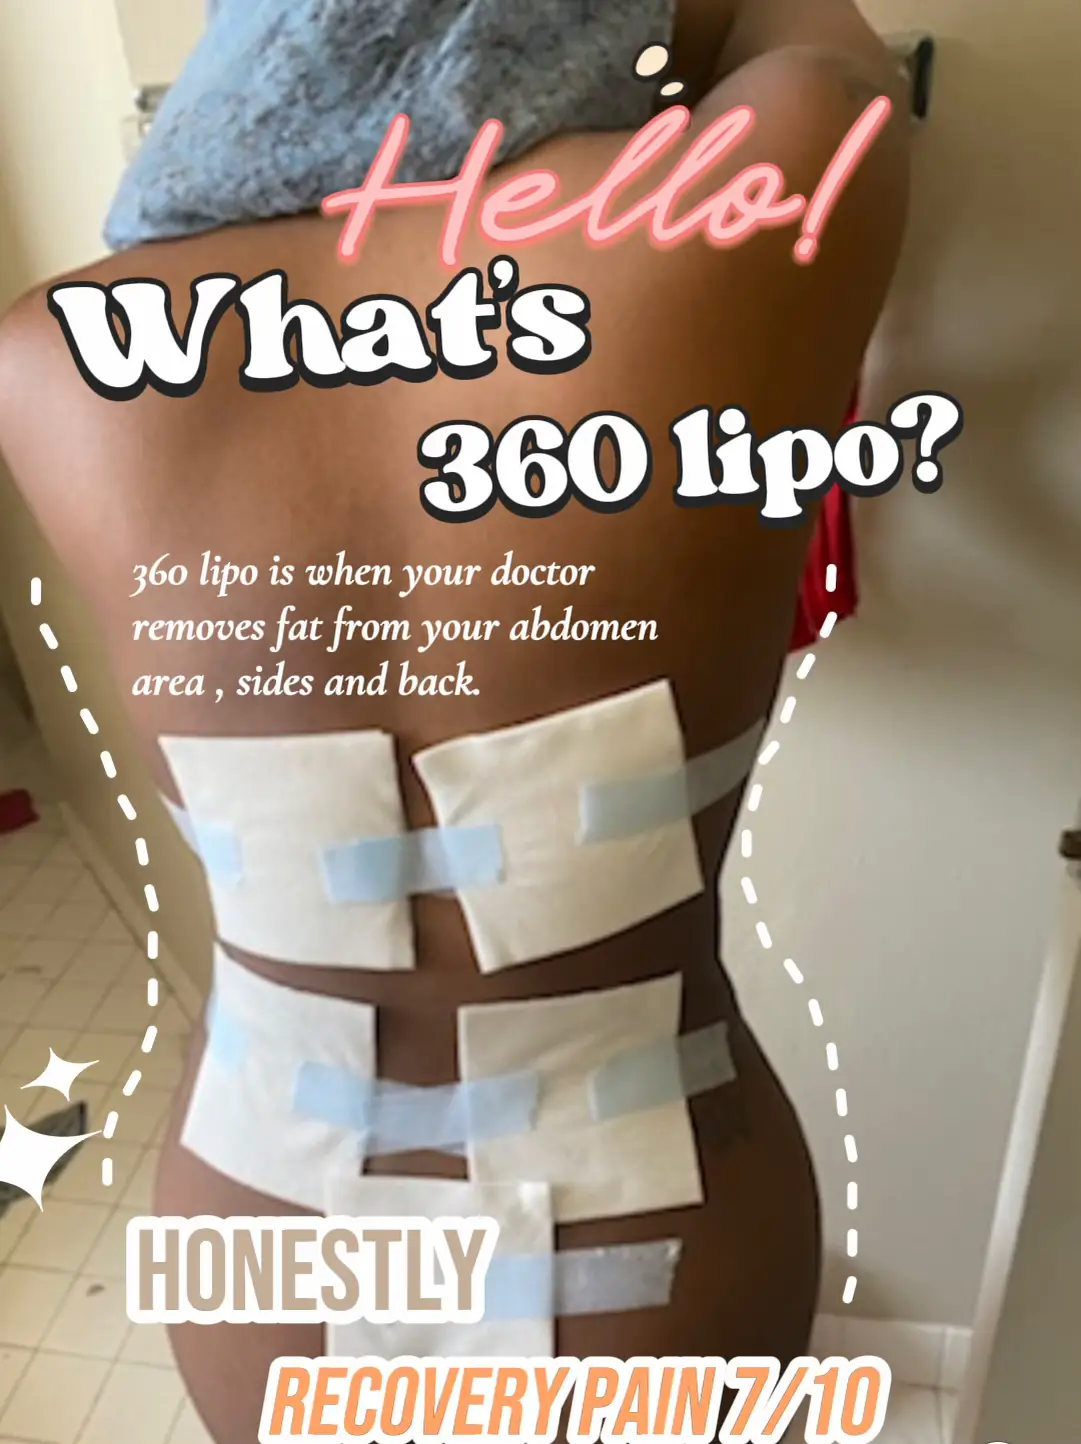 Why Is Post-Operative Care Important for Lipo - Lemon8 Search